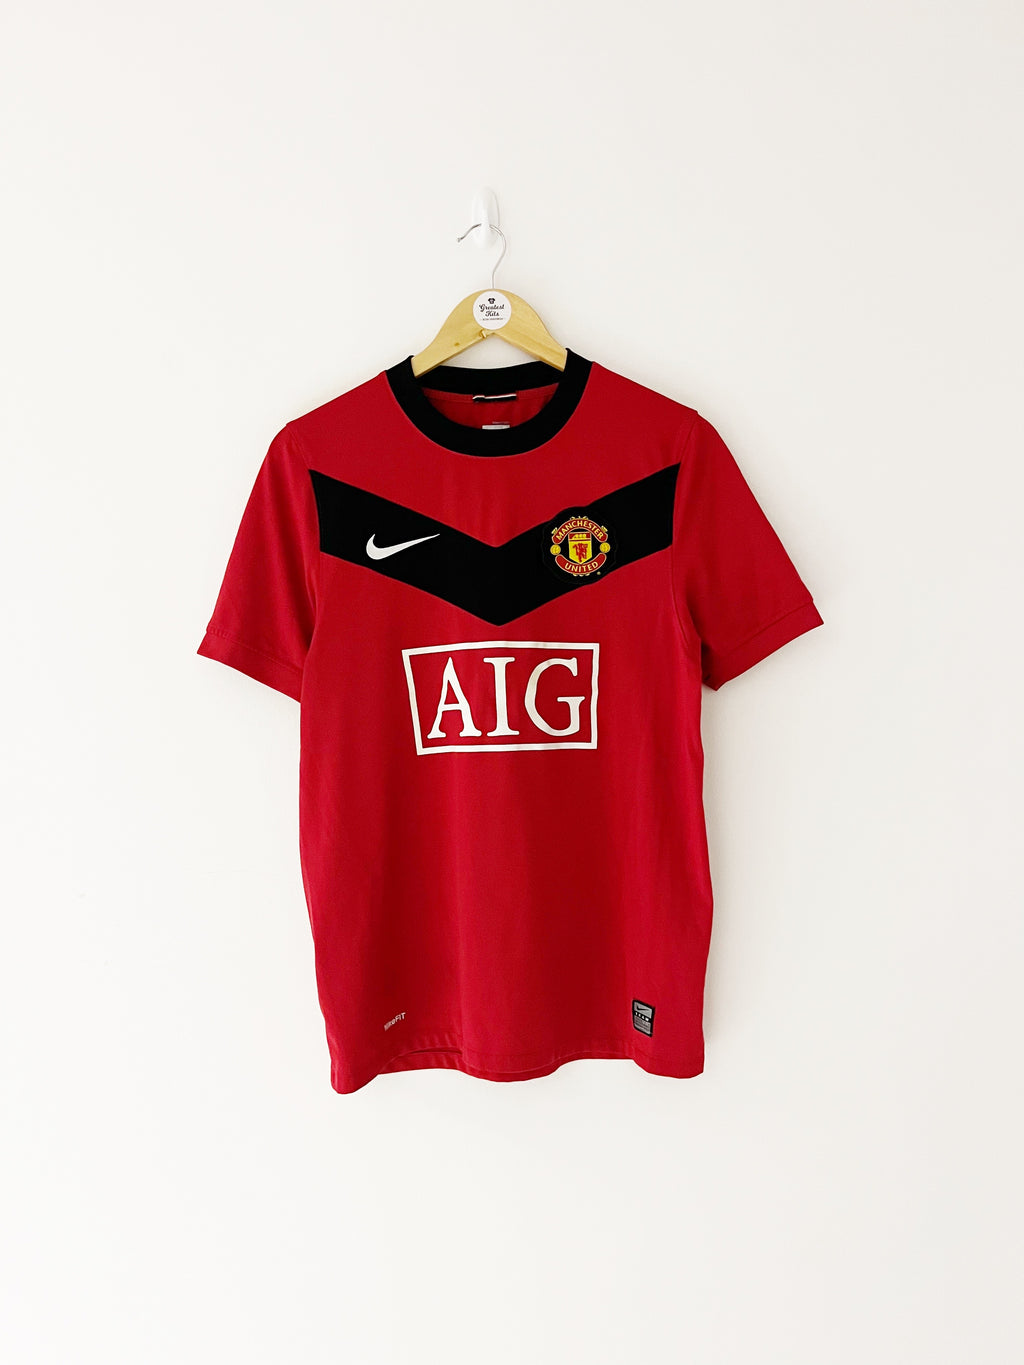 2009/10 Manchester United Home Shirt (S) 7.5/10